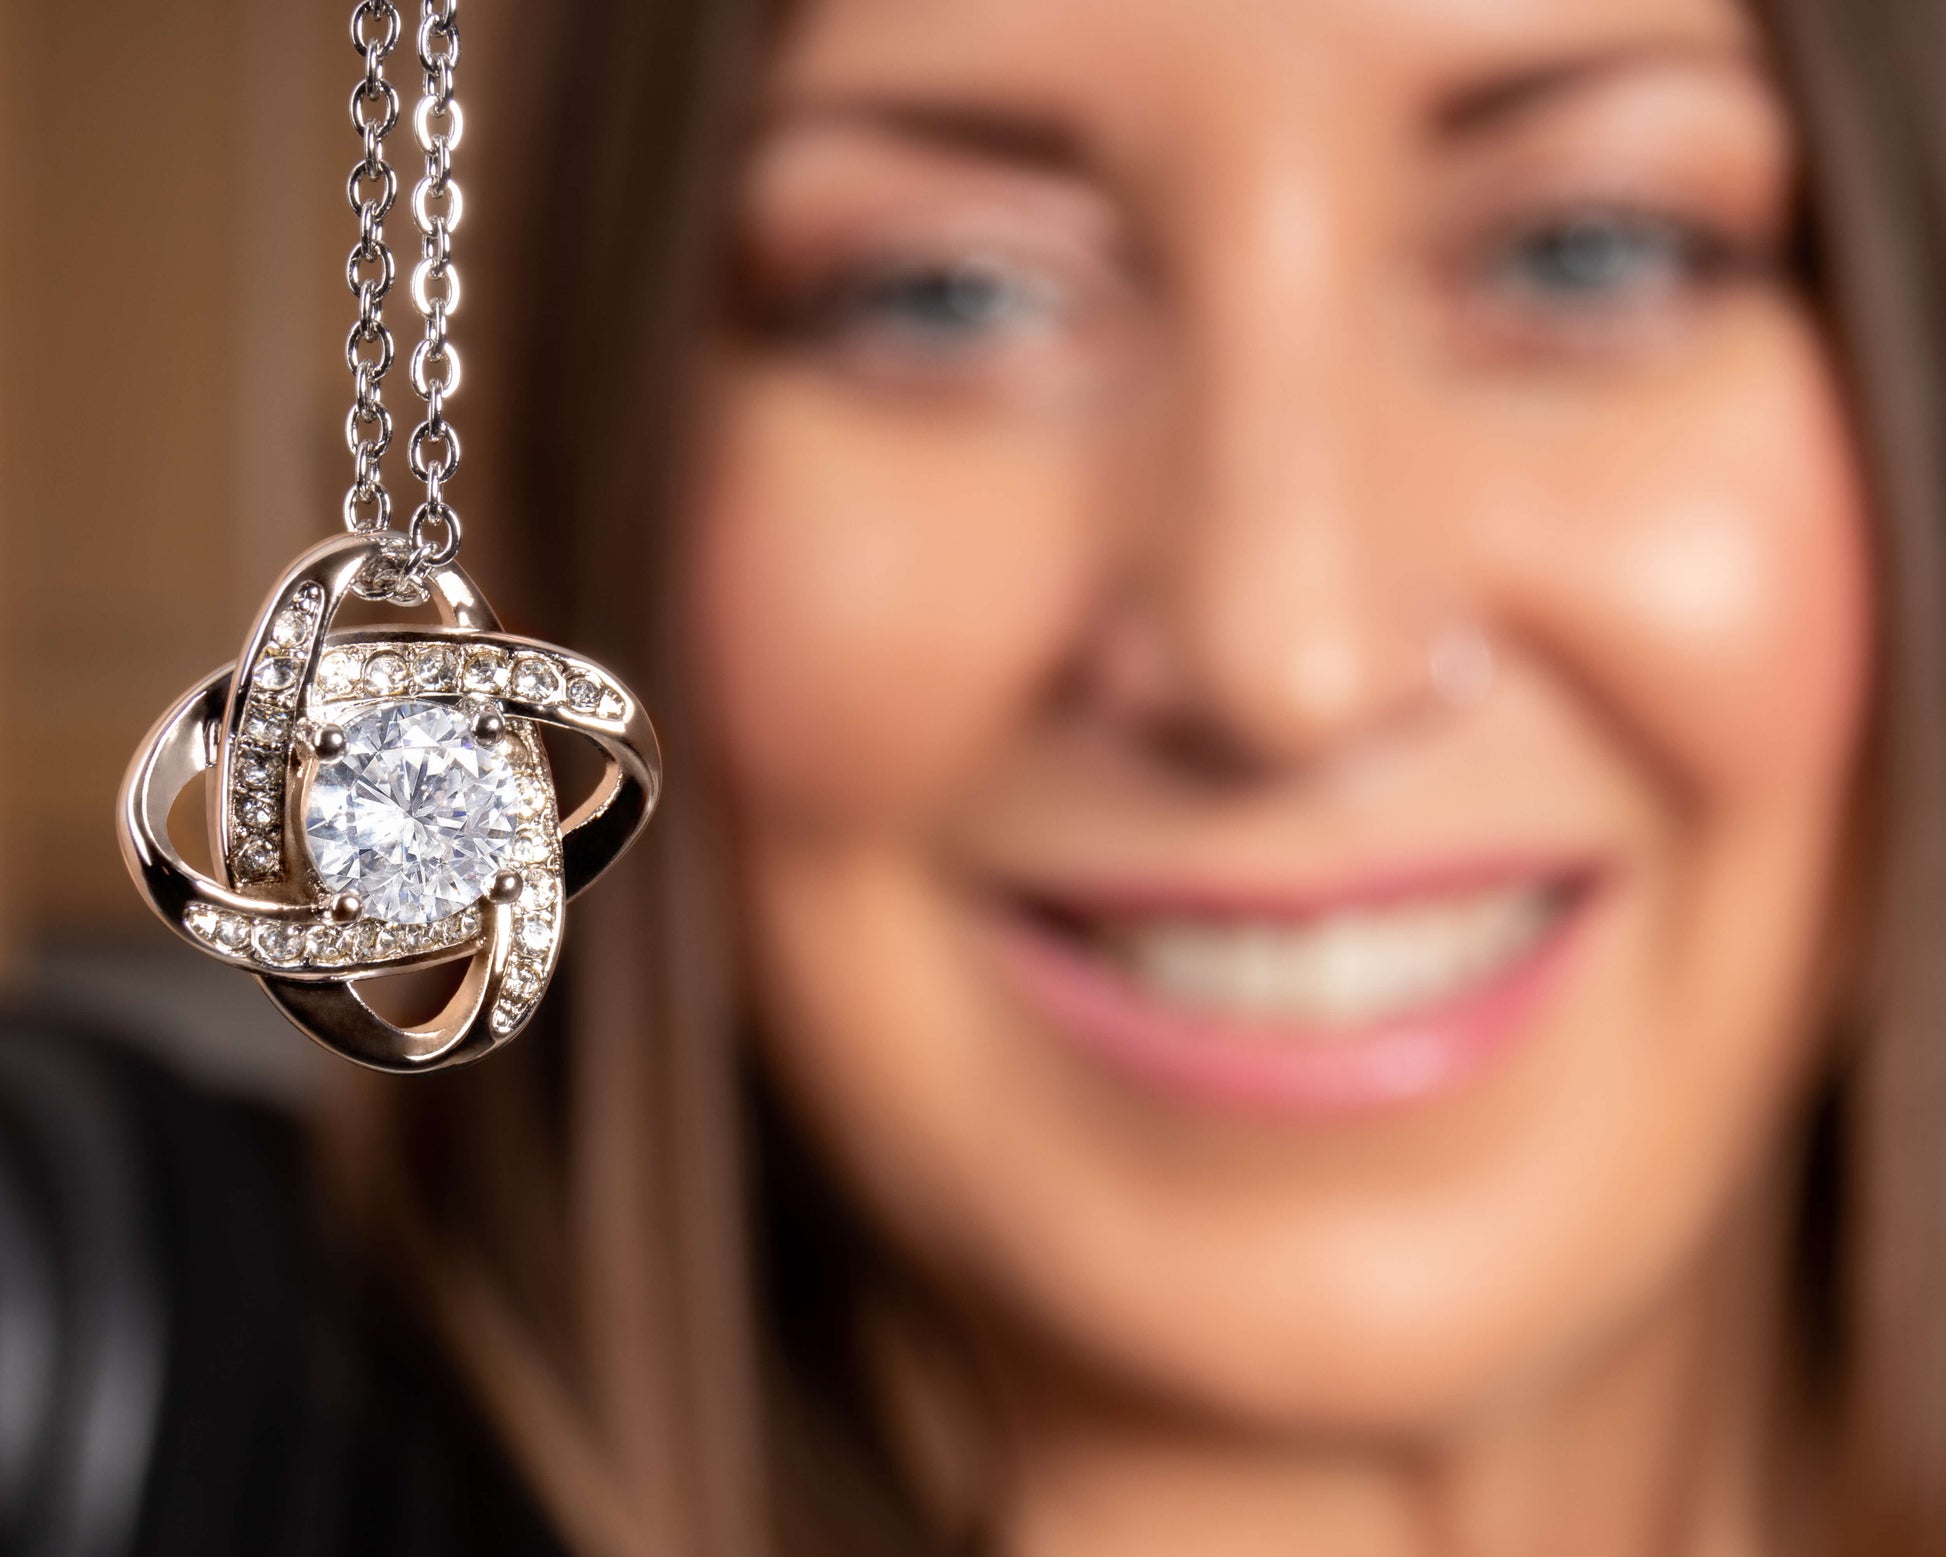 The Love Knot Necklace represents an unbreakable bond between two souls. Surprise your loved one with this gorgeous gift today! The beautiful Love Knot is crafted with brilliant 14k white gold over stainless steel and swings from an adjustable cable chain fastened securely with a lobster clasp. 